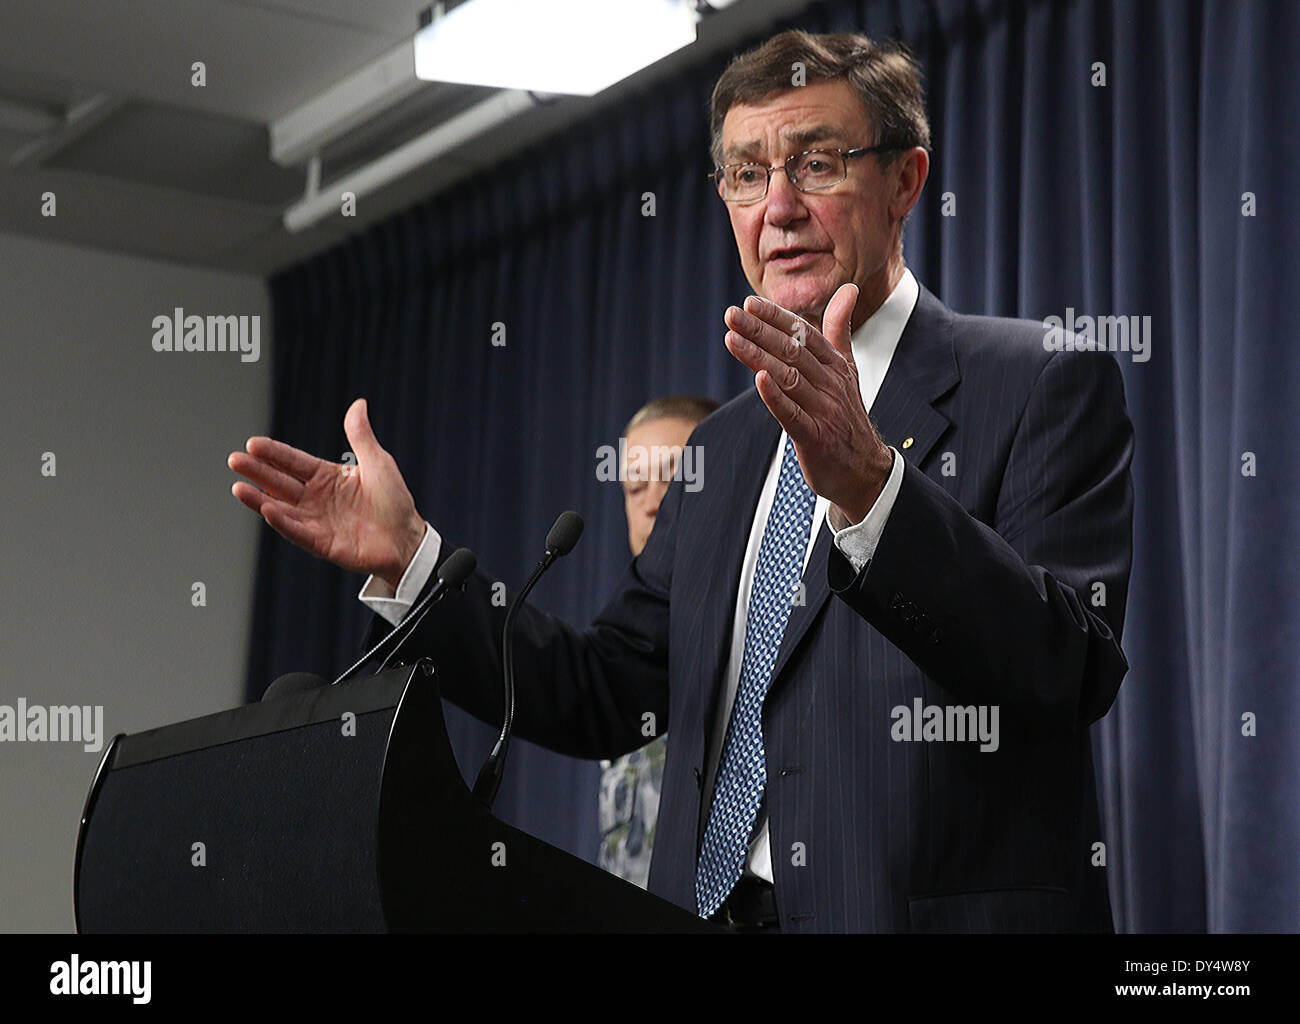 Perth, Australia. 7th April, 2014. Angus Houston, head of the Joint Agency Coordination Center (JACC) for the searching of the missing Malaysian flight MH370 speaks during a news conference in Perth, Australia, on April 7, 2014. An Australian vessel searching the missing Malaysian flight 370 has detected electronic pulse signals probably related to the black box in the Indian Ocean during the past 24 hours. However, the unsuccessful effort to reacquire the signal later may suggest the battery may finish in a very short time, according to searching officials and U.S. Navy technicians. Stock Photo